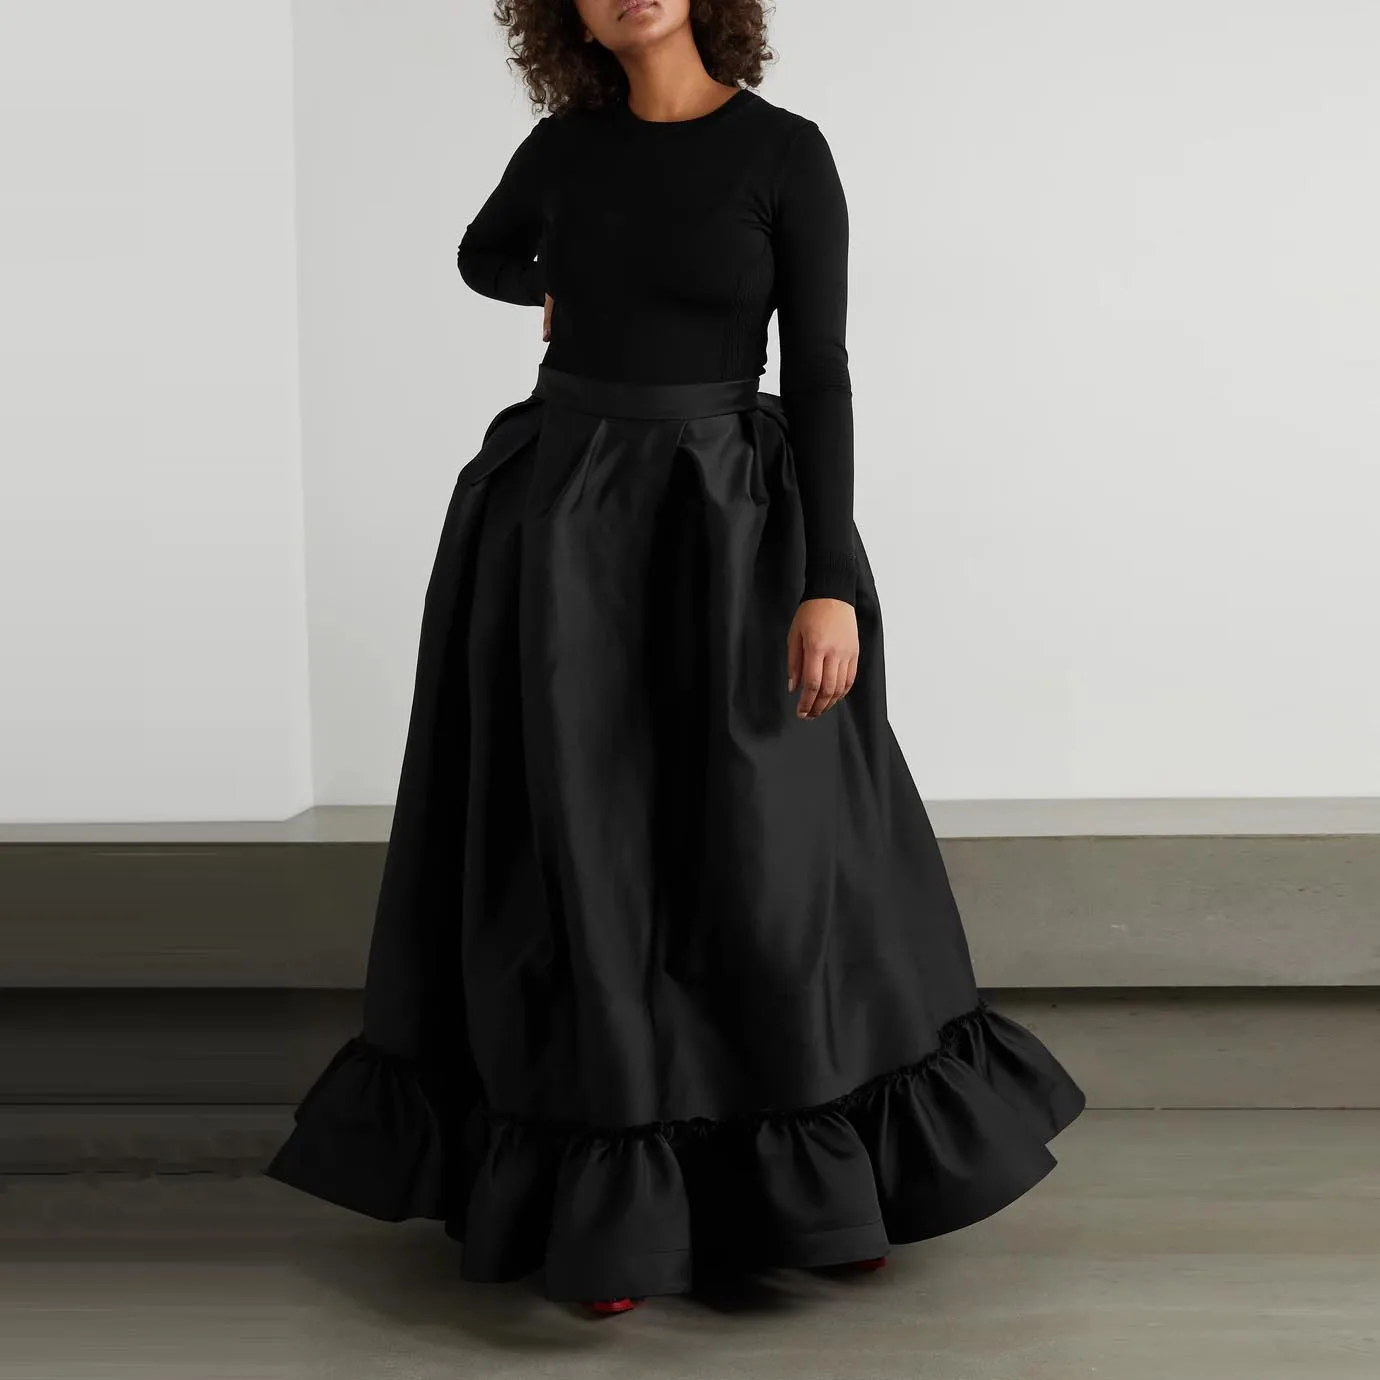 

Bow-Detailed Recycled Duchesse-Satin Maxi Skirt Long Black Satin Skirt Ruffles A-Line Gowns Lace Up Waist Skirts Ever Pretty